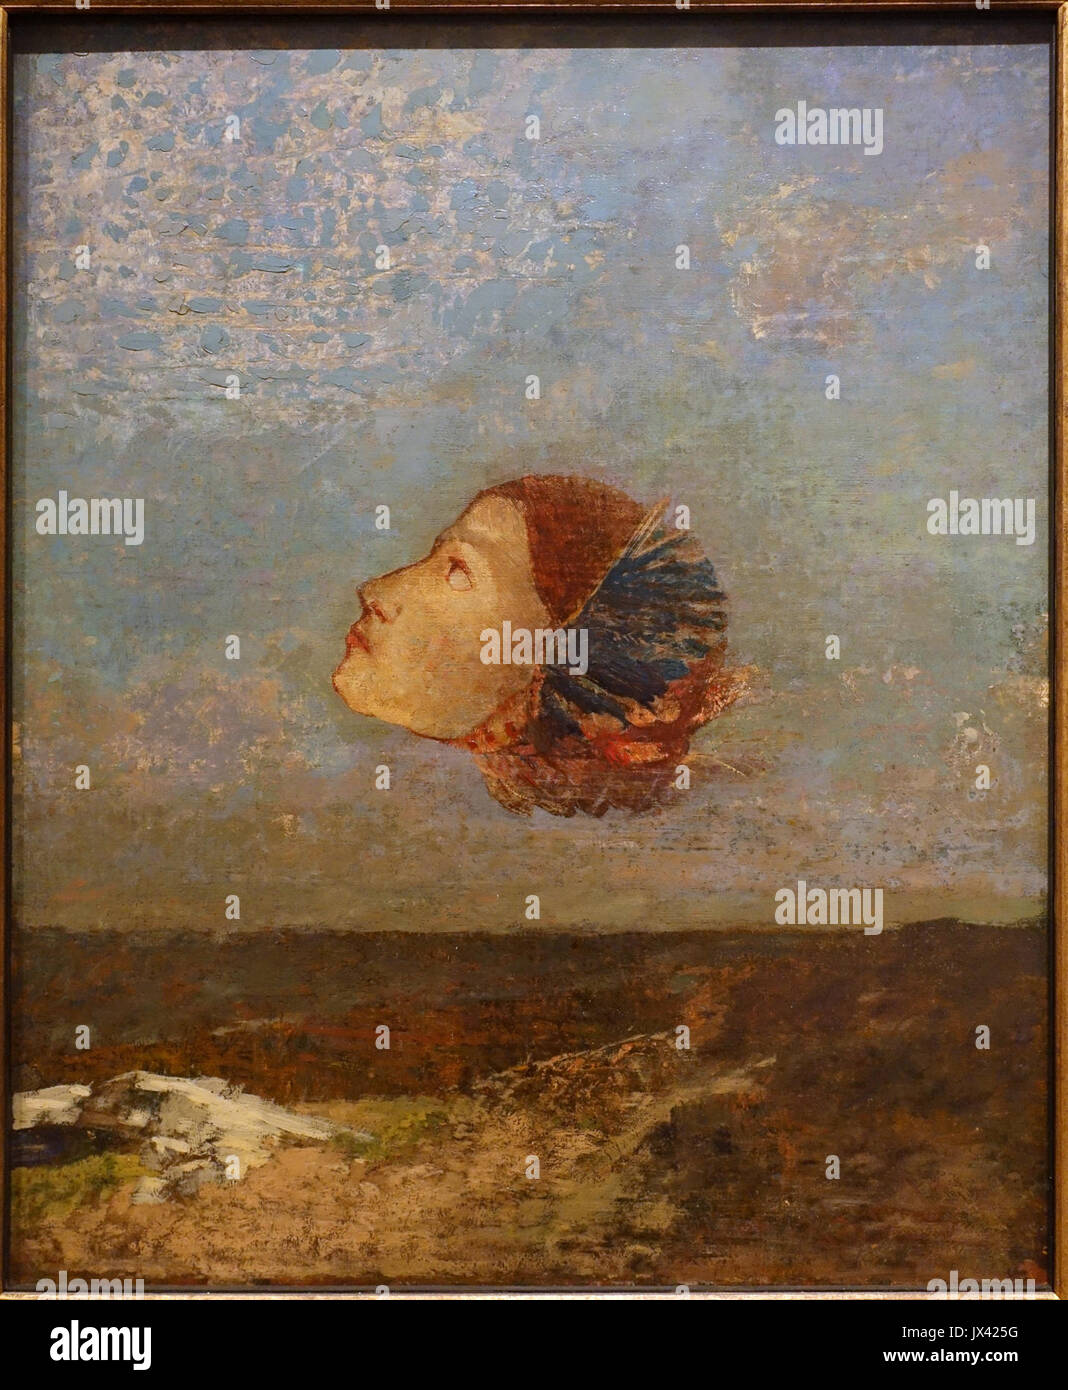 Hommage a Goya, by Odilon Redon, view 1, c  1885, oil on cardboard, mounted on canvas   Scharf Gerstenberg Collection   DSC03859 Stock Photo